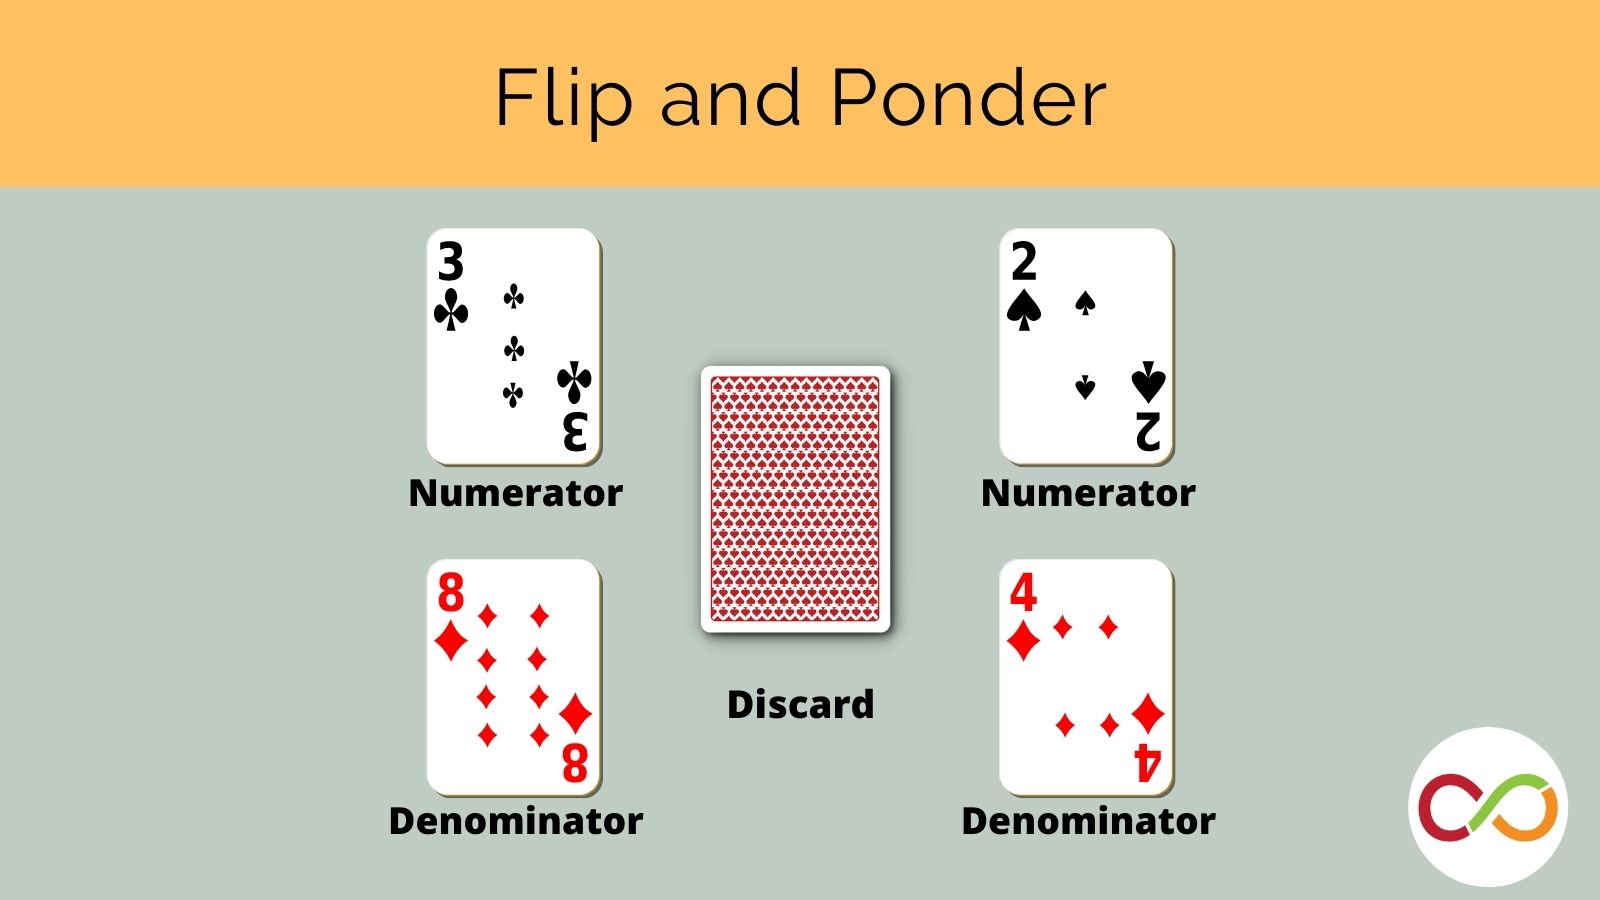 An image linking to the flip and ponder lesson